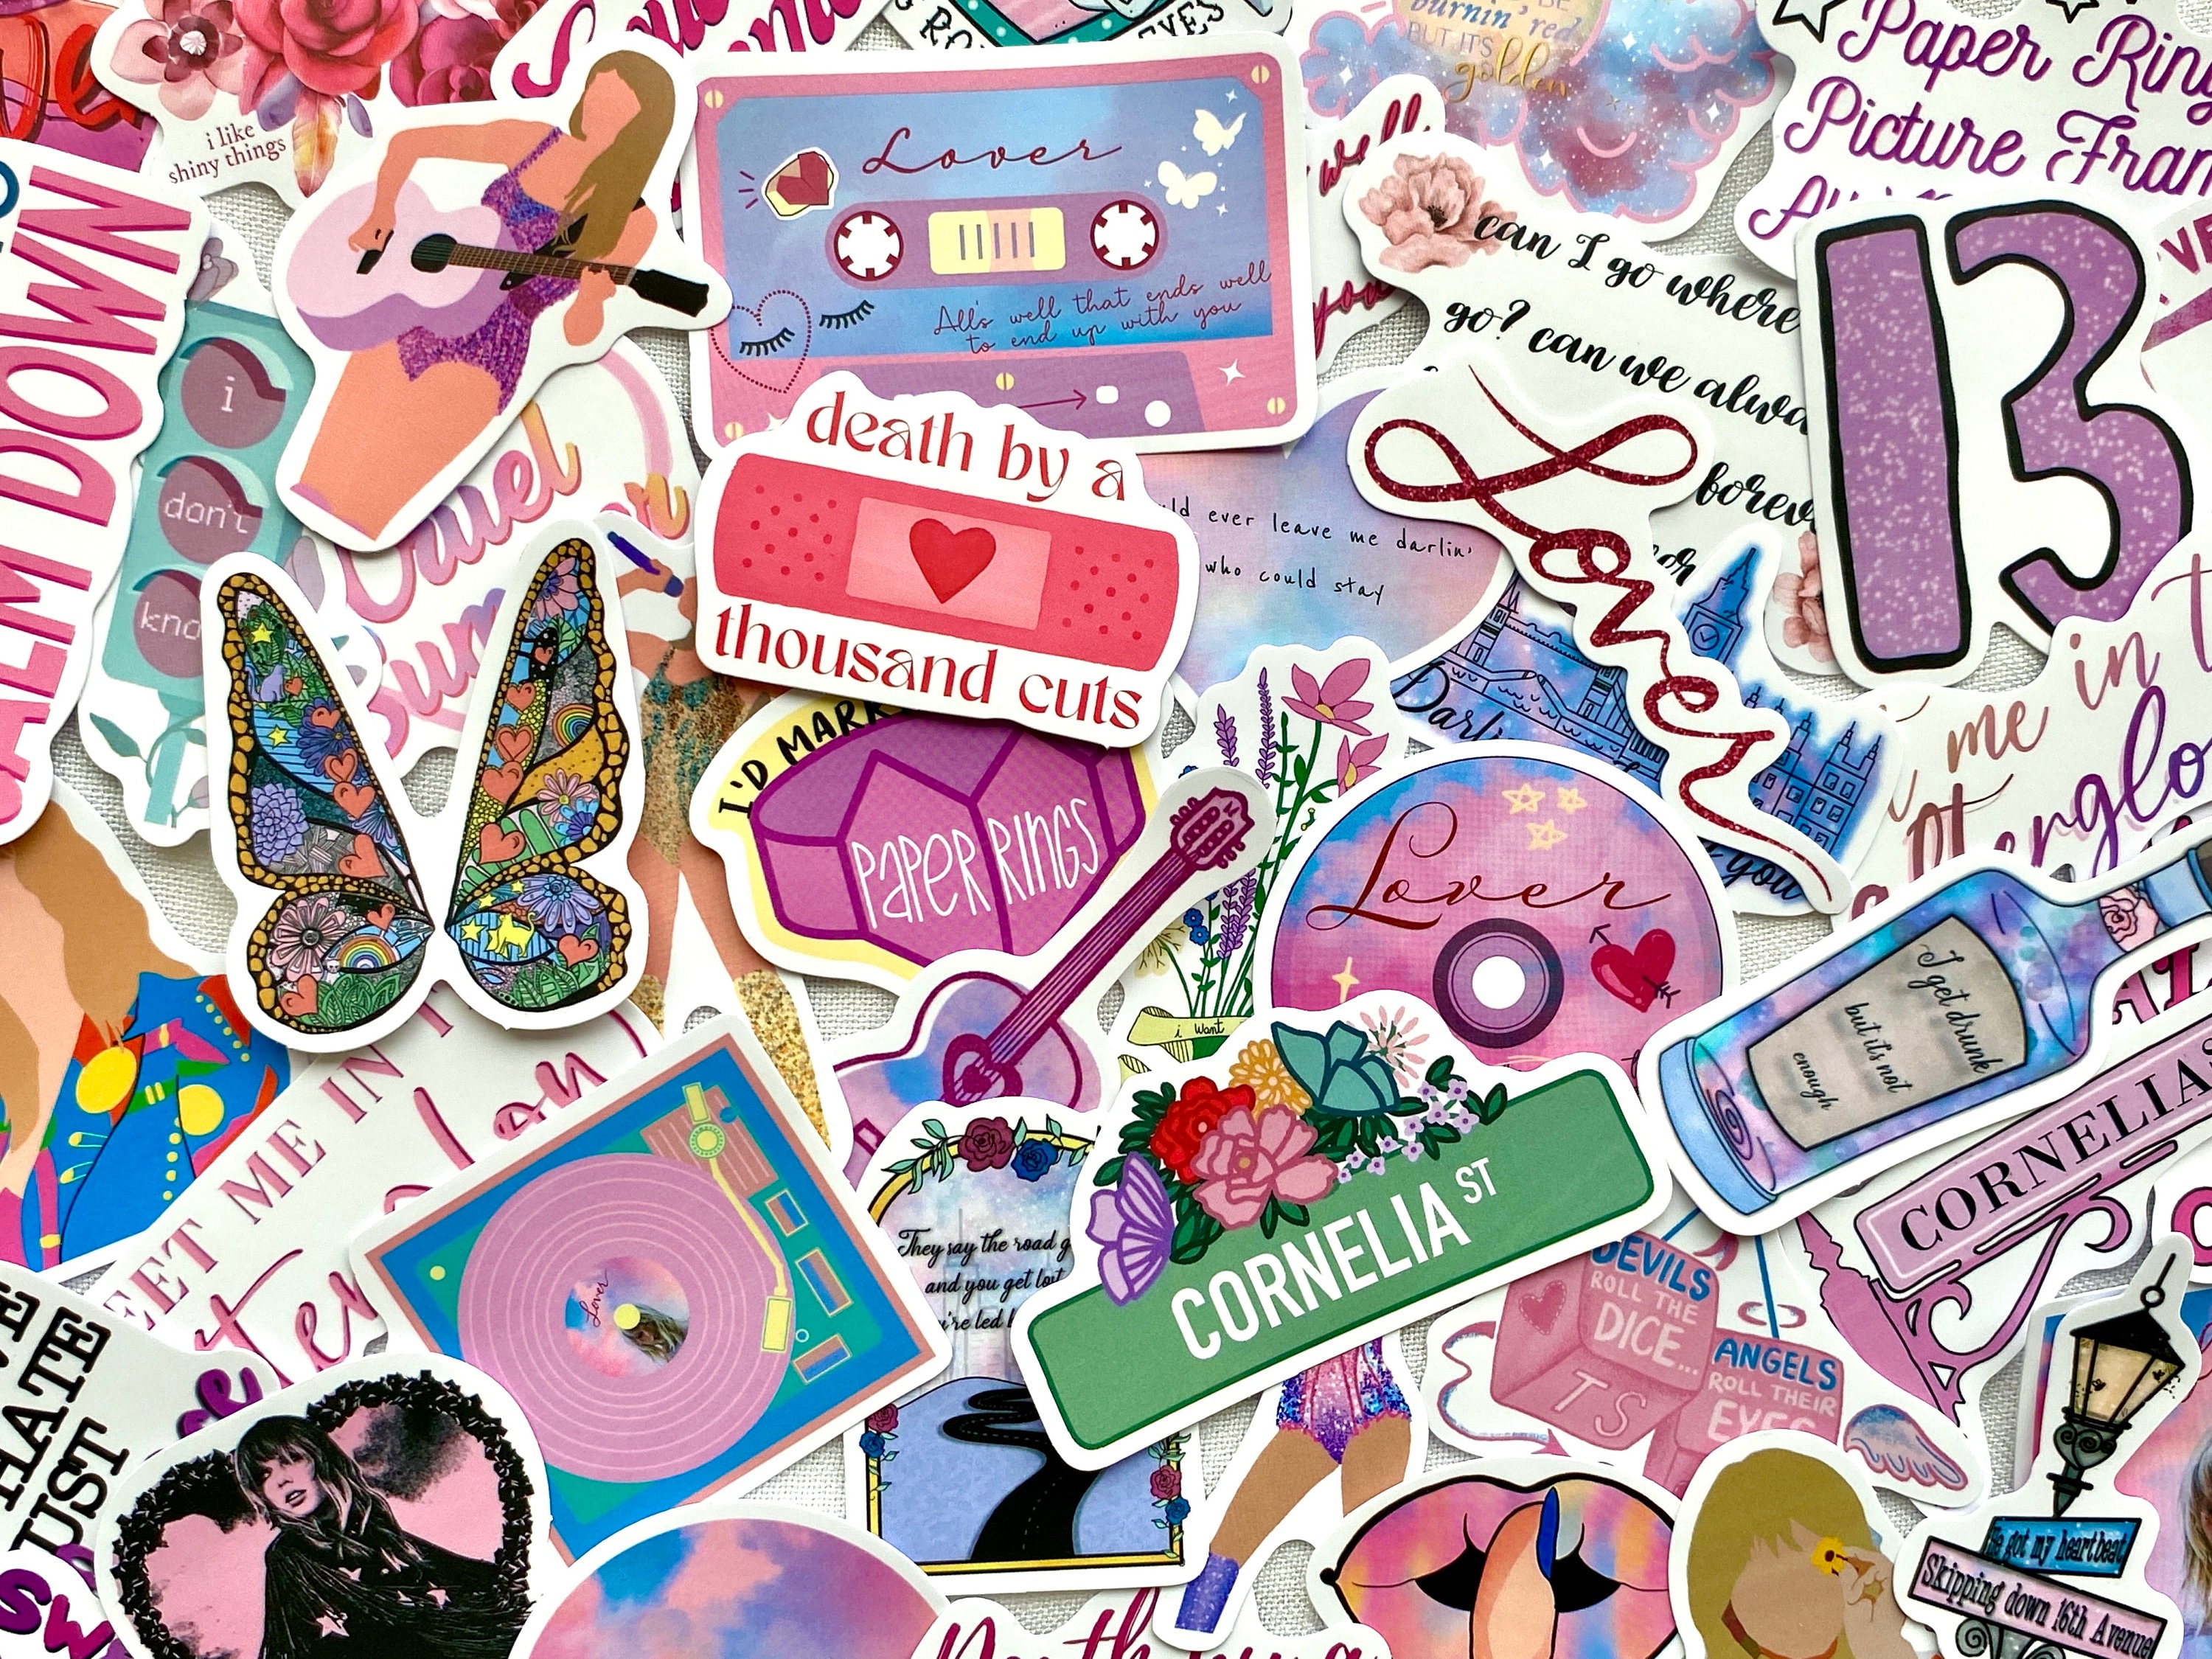 Taylor Swift Merch: 50PCS Taylor Music Stickers,All Swift Album Stickers  for Adult,Waterproof Vinyl Sticker for Water Bottles,Laptops,Music  Fans,Party Favors Party Decorat Supplies Fans Gifts 